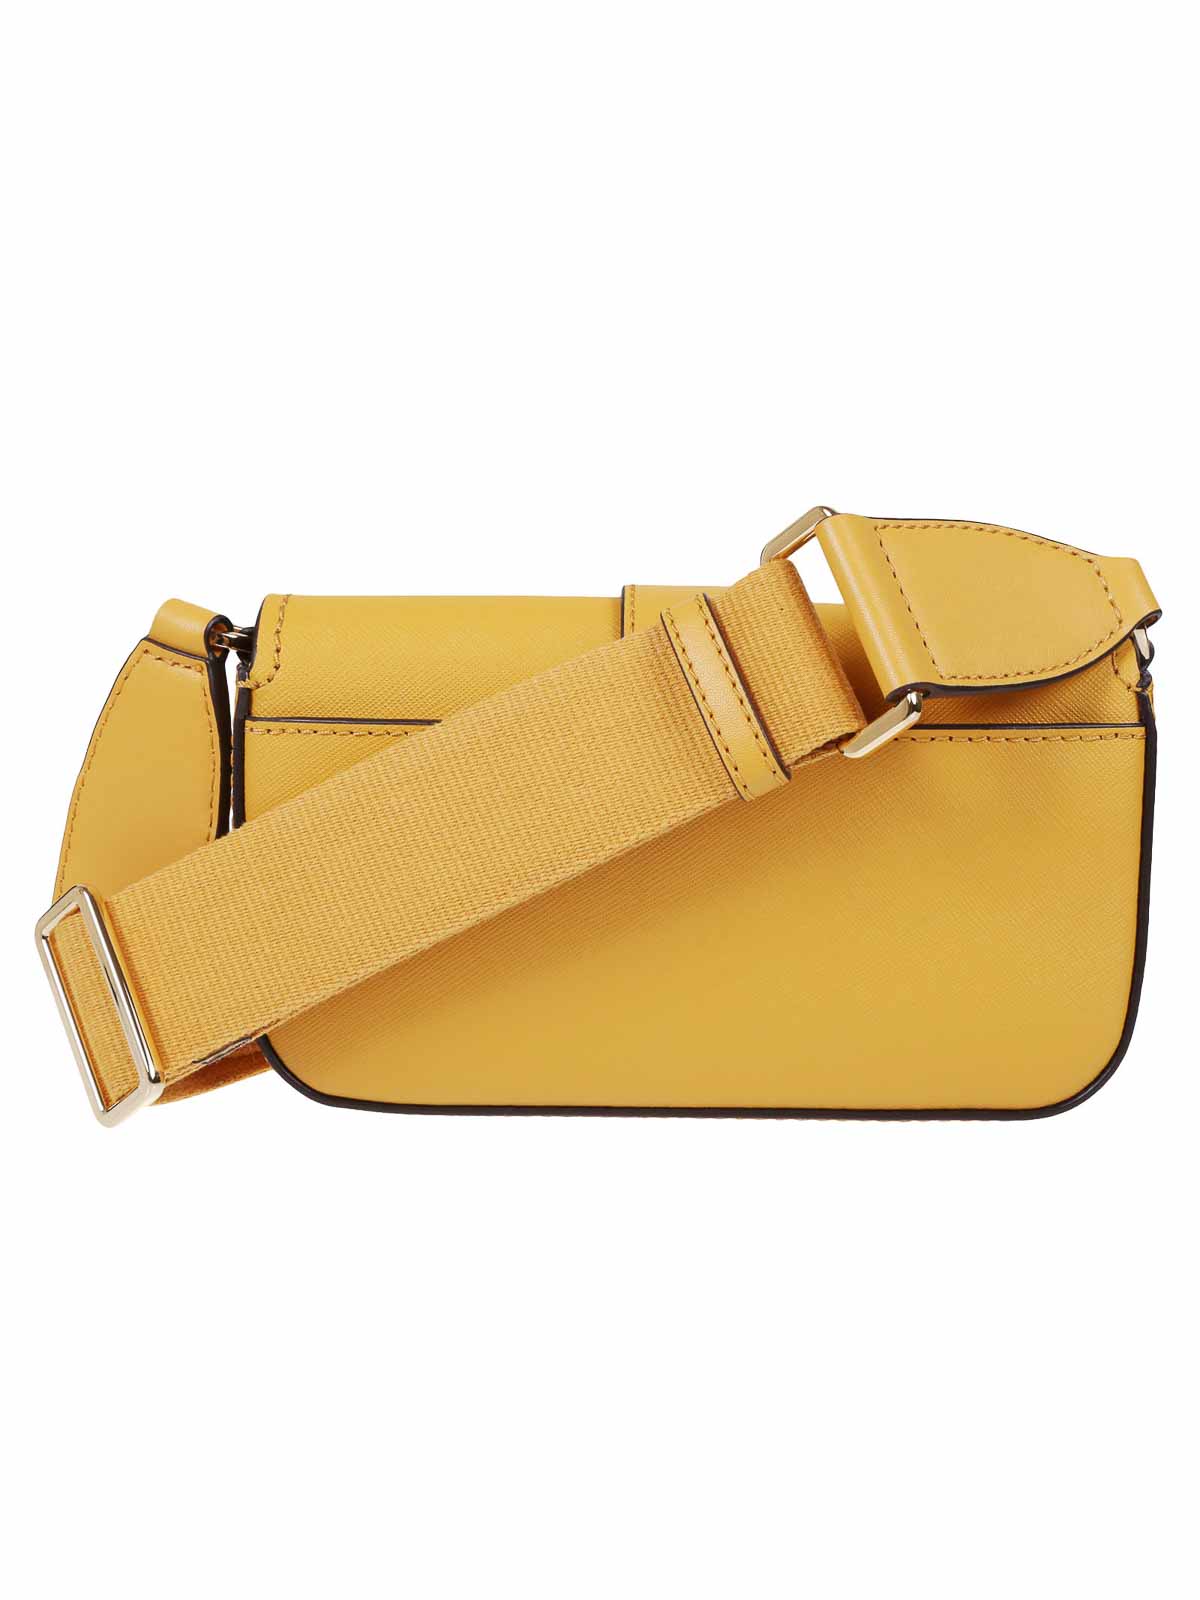 Shop Michael Kors Saffiano Leather Bag In Yellow